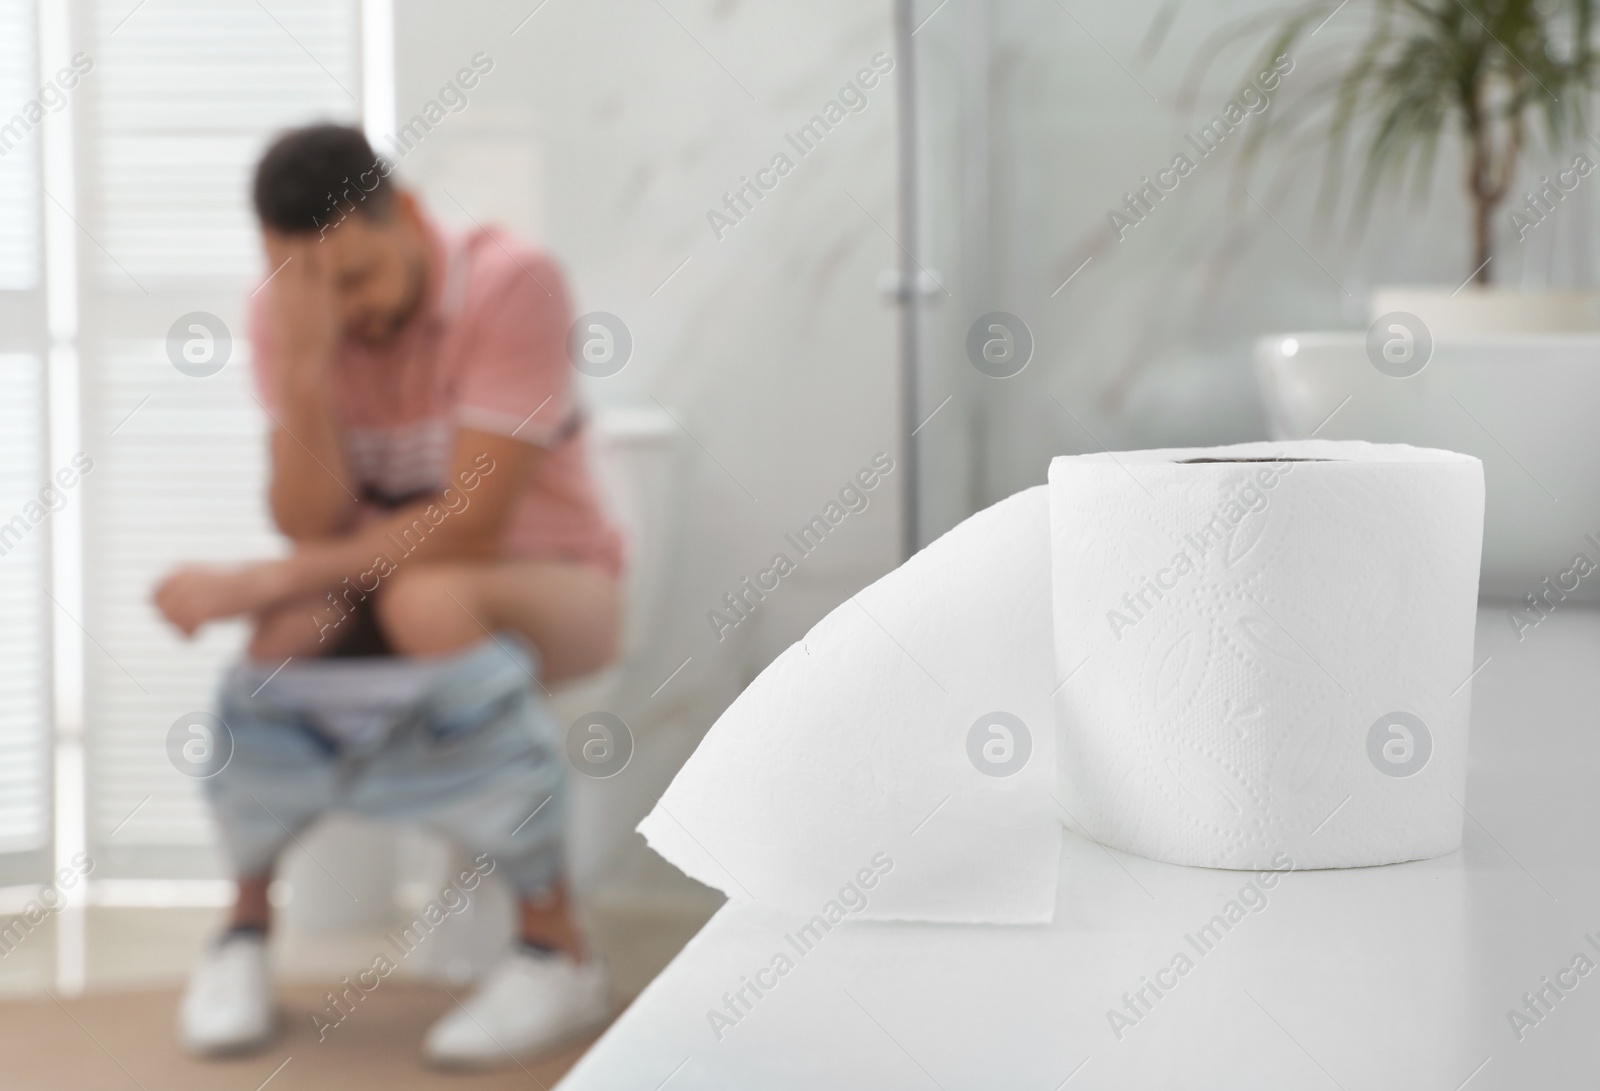 Photo of Man suffering from hemorrhoid in rest room, focus on toilet paper